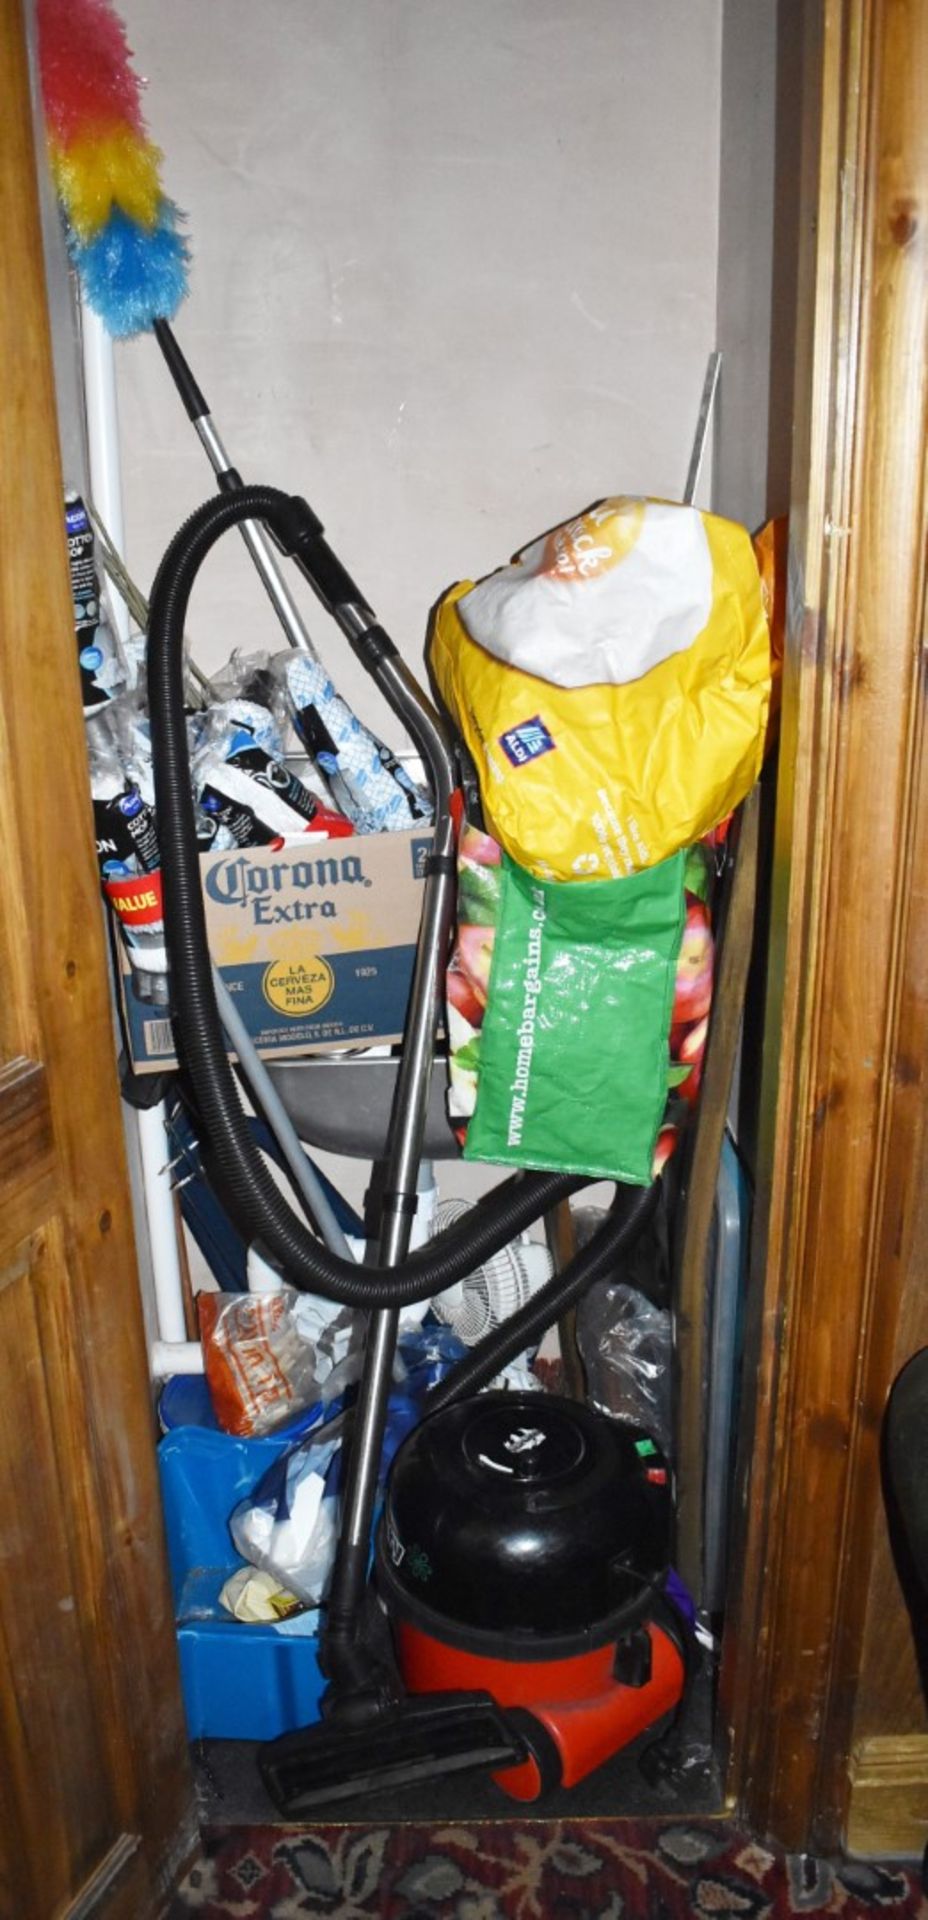 1 x Contents of Storage Room Including Numatic Henry Hoover, Fan, Duster, Mop Heads, Brush and - Image 2 of 3